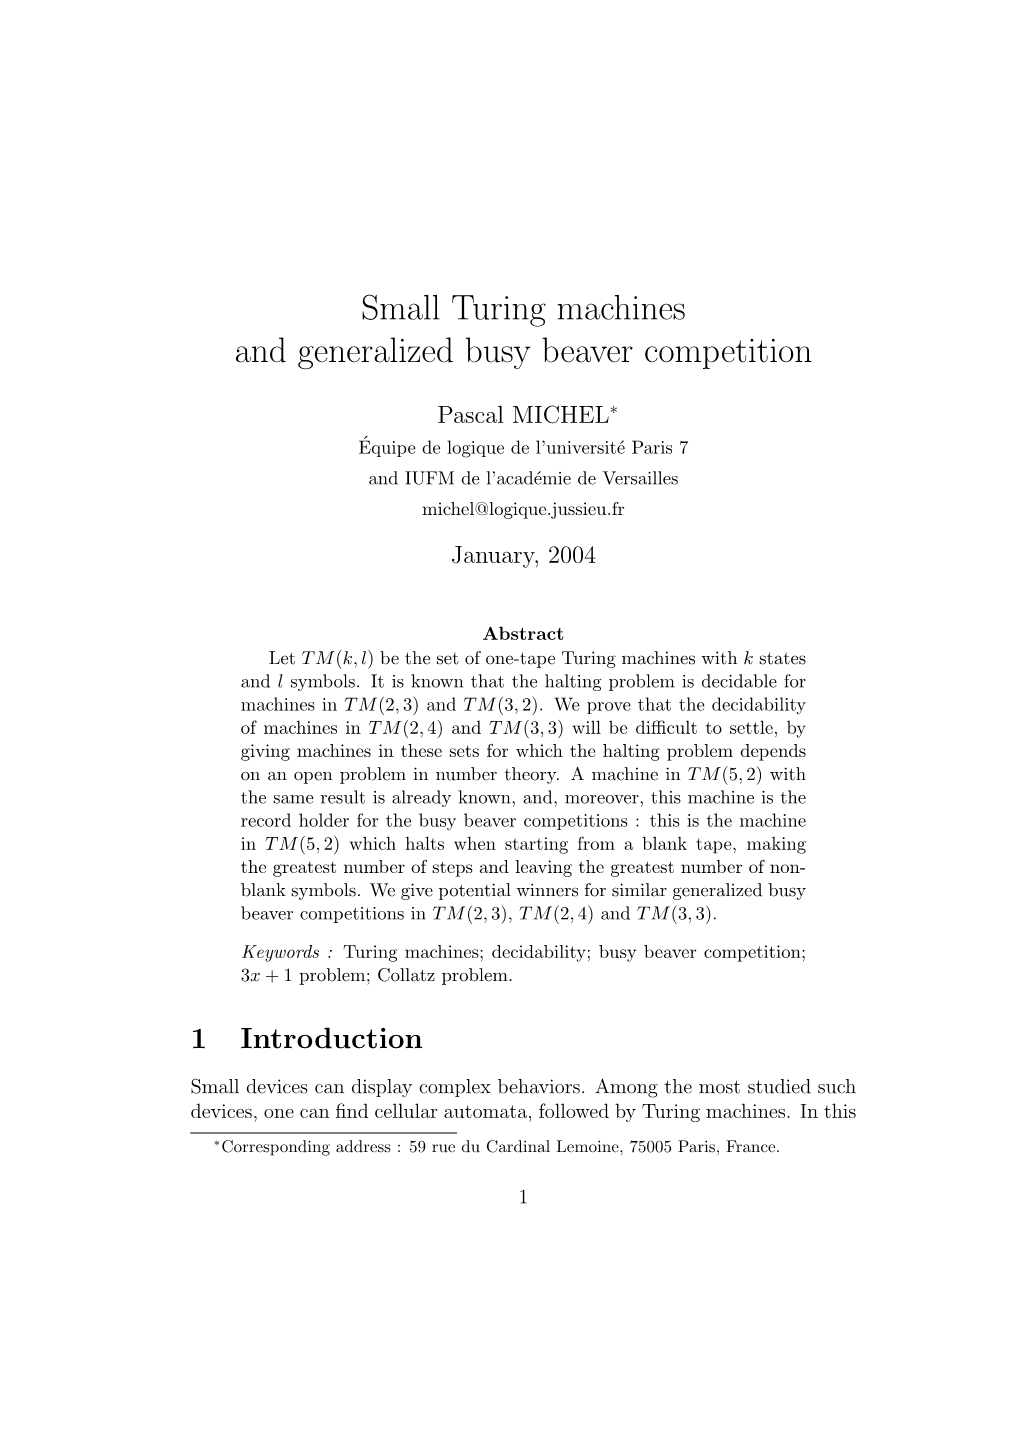 Small Turing Machines and Generalized Busy Beaver Competition